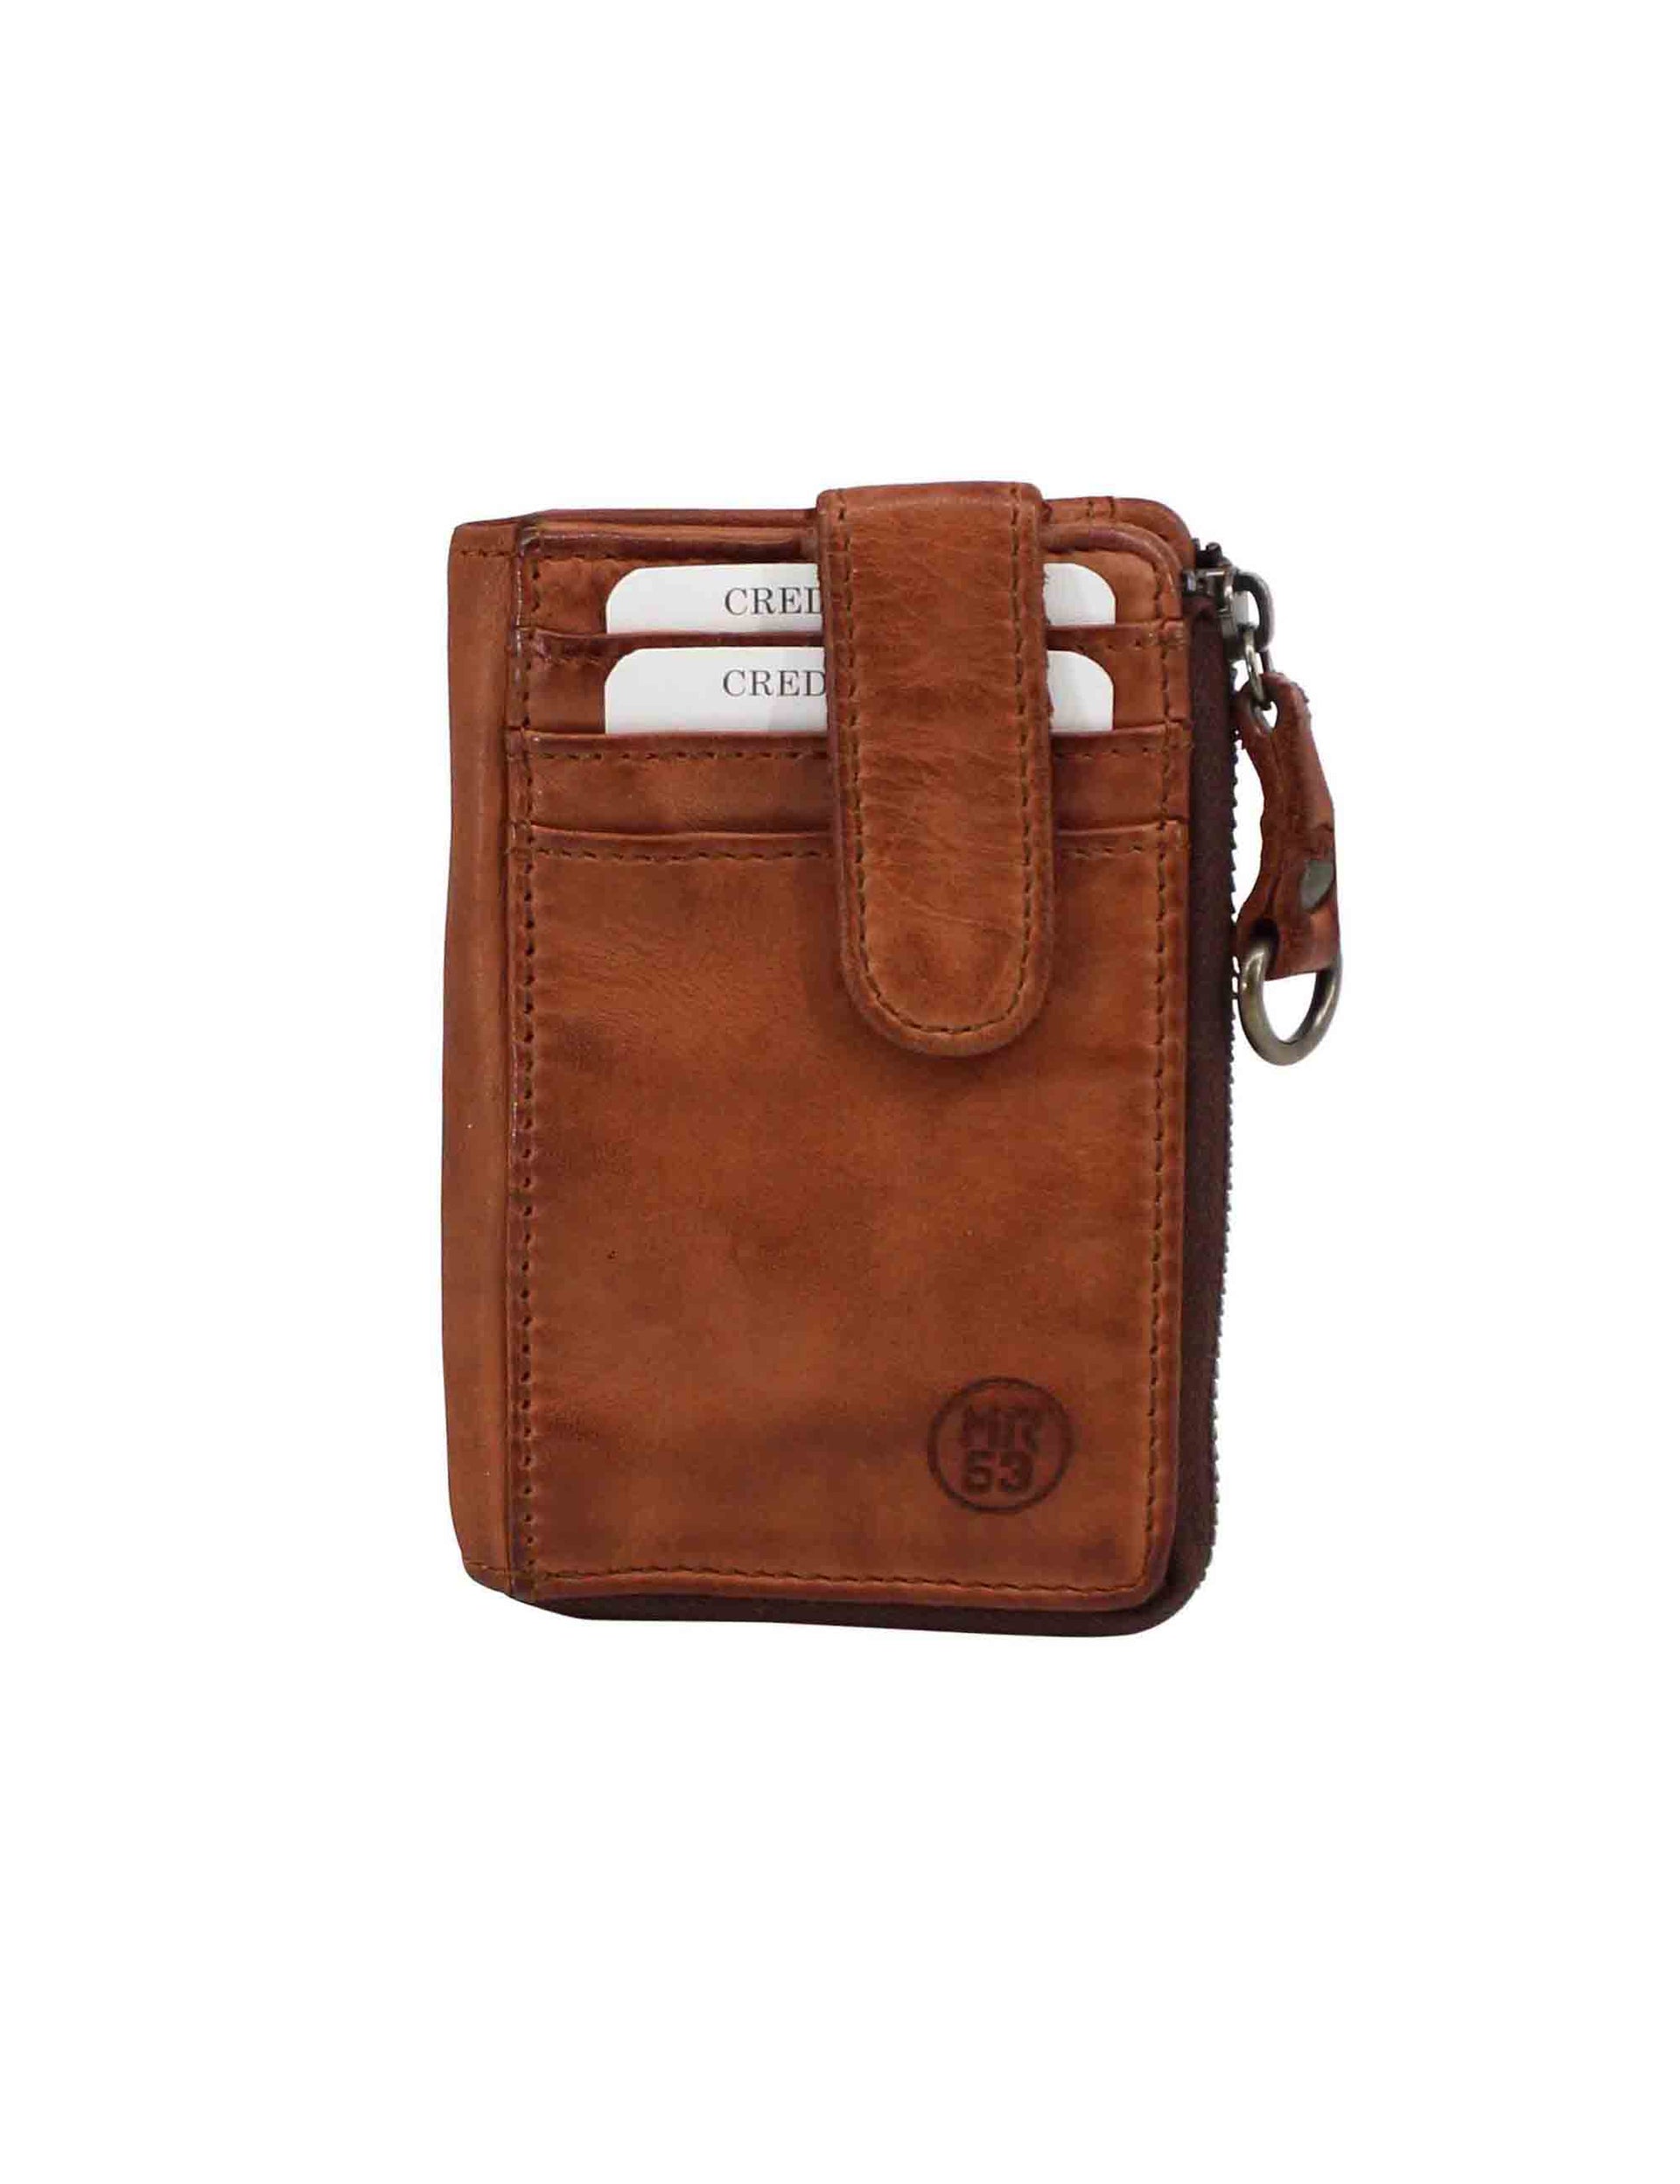 Men's card holder with zip in vintage tan leather